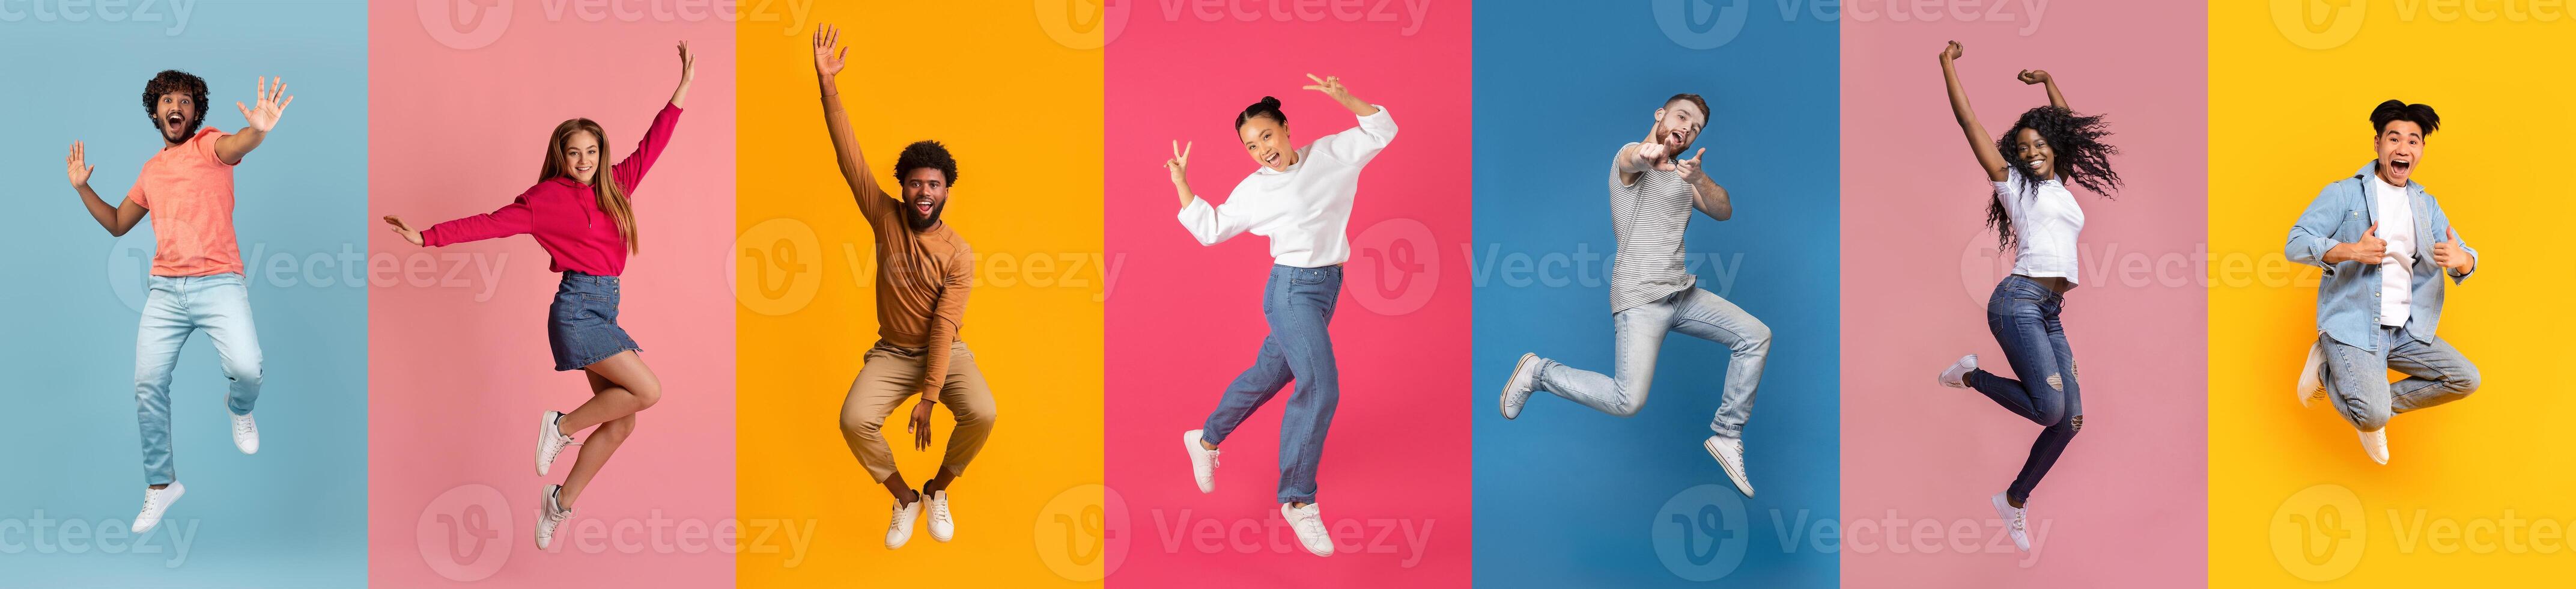 Group of energetic young people leap in the air, expressing happiness photo